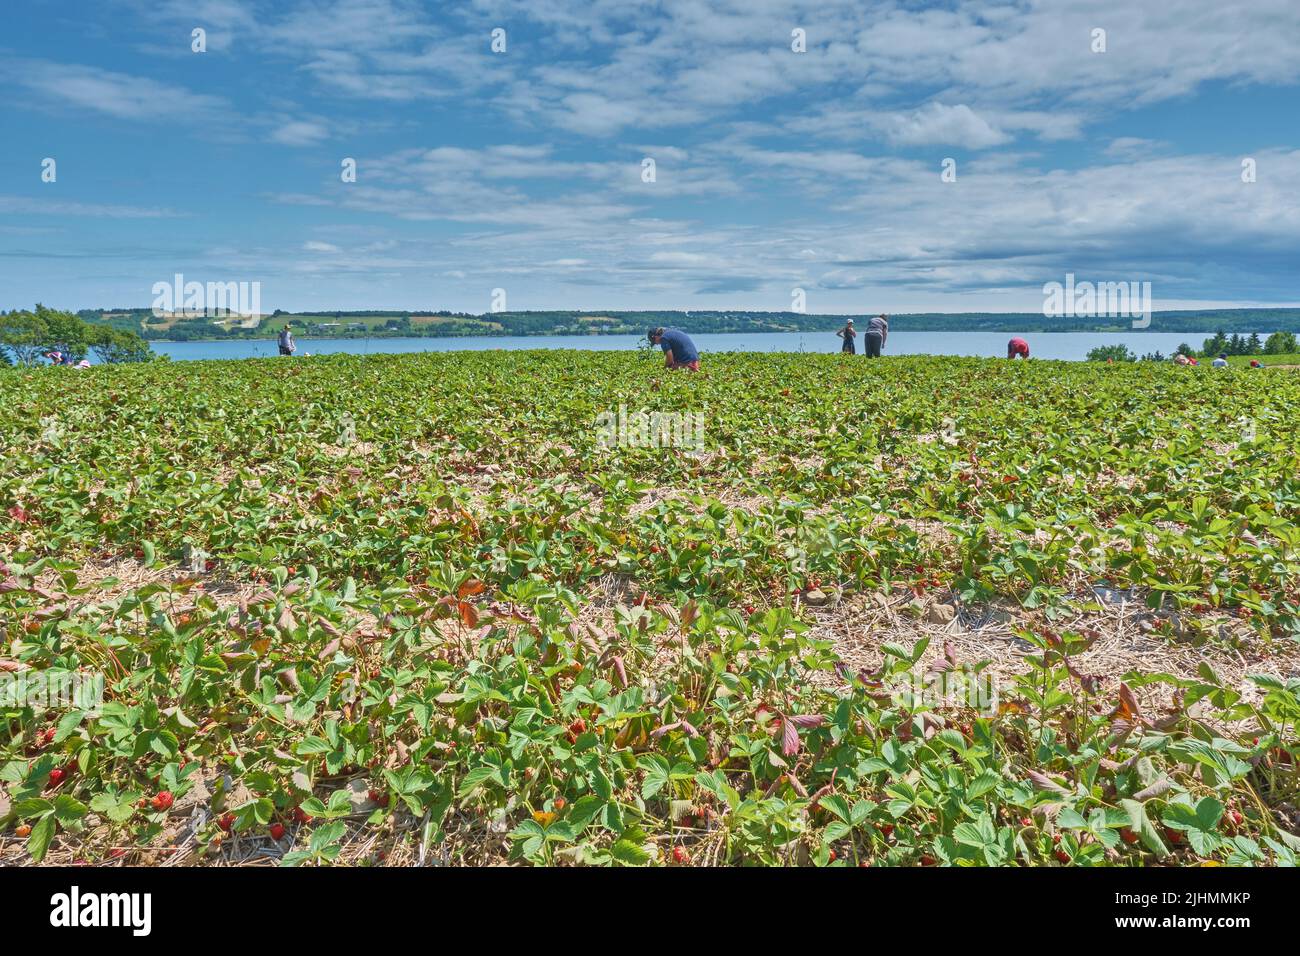 People picking strawberries in a field near Bras Dor Nova Scotia on a beautiful July day. Stock Photo